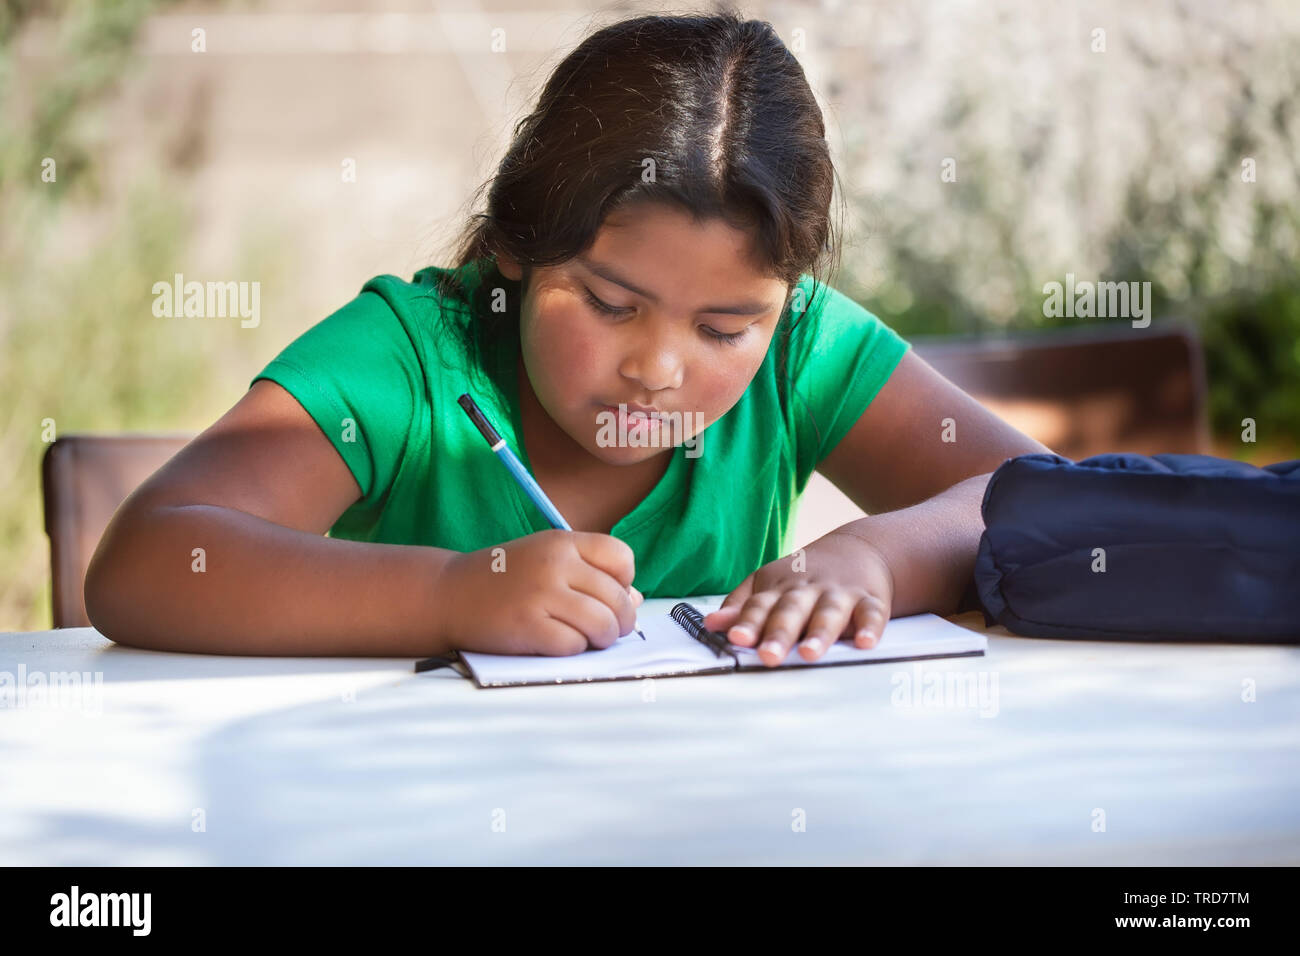 Focused young girl writing in her notebook, problem solving and studying outdoors in homeschool setting. Stock Photo